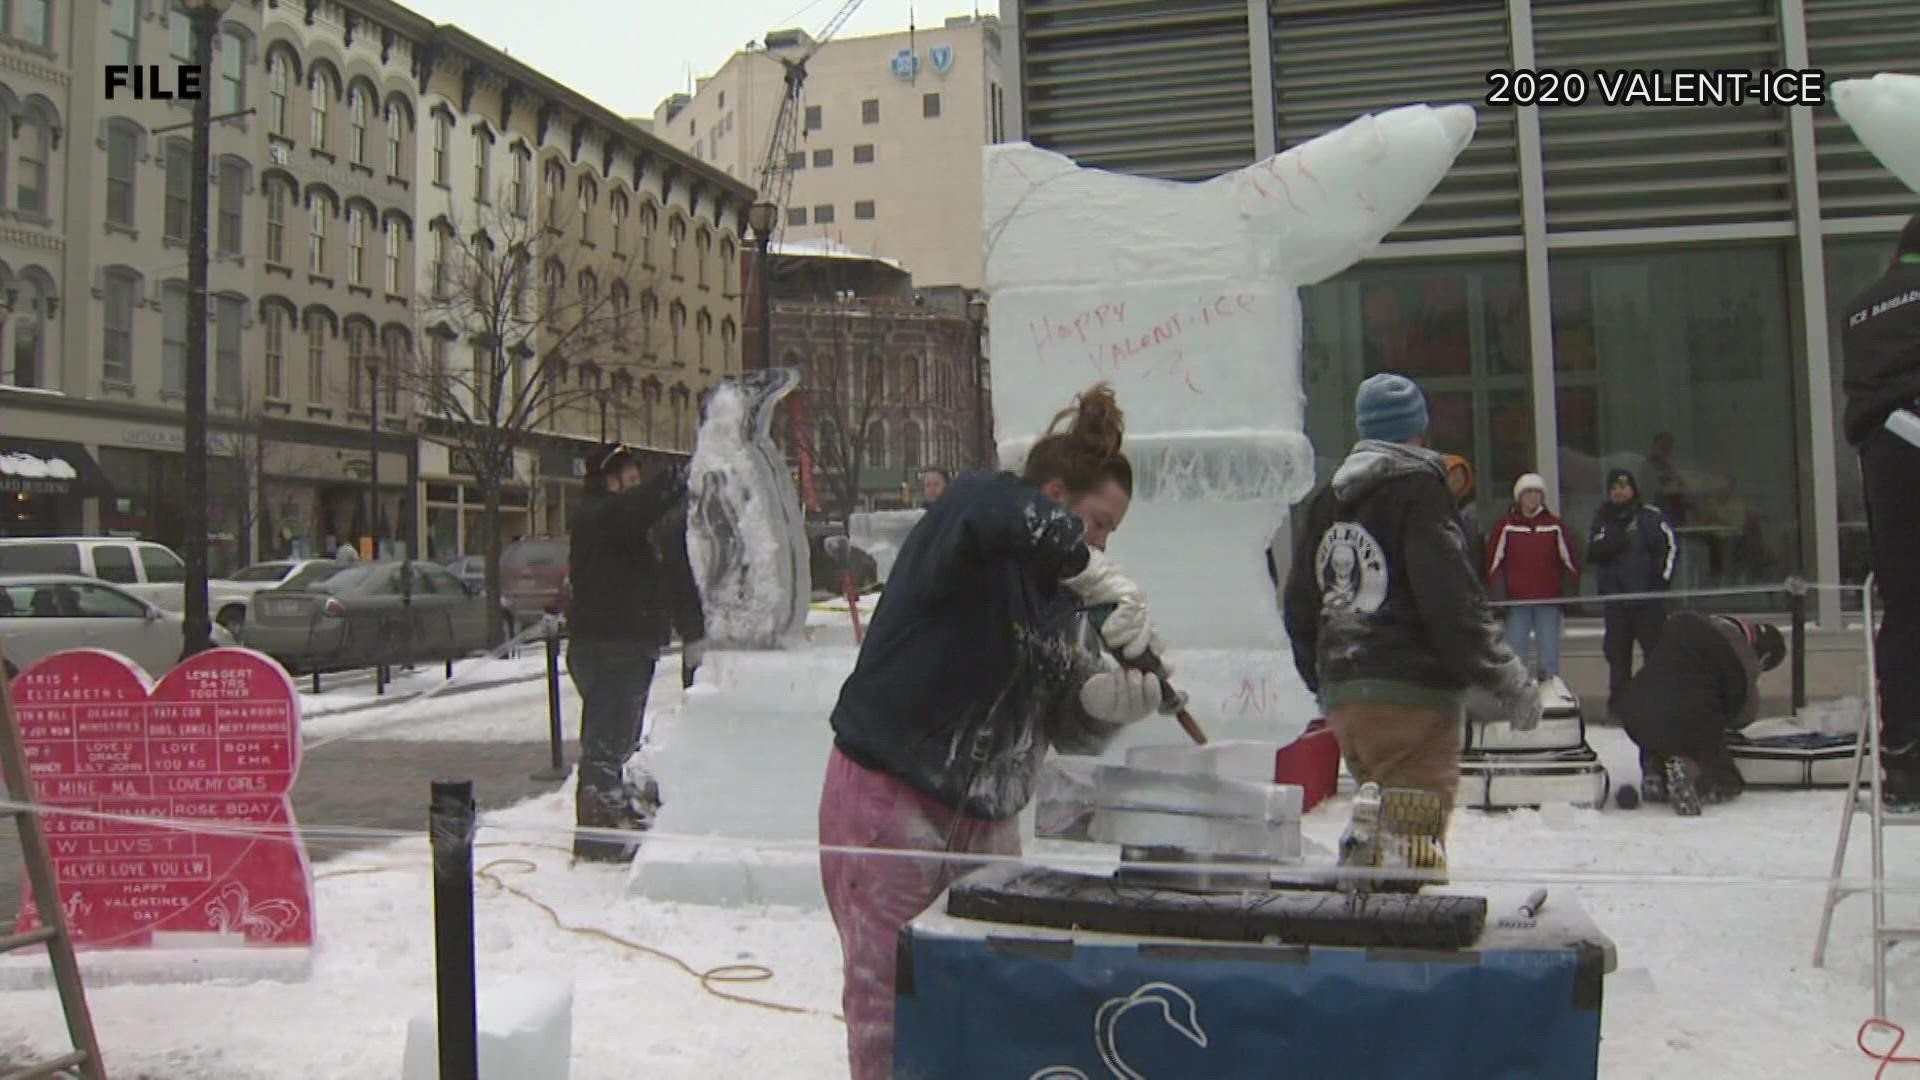 Valent-ICE, one of many attractions during the World of Winter Festival, showcases dozens of ice sculptures all throughout Downtown Grand Rapids.